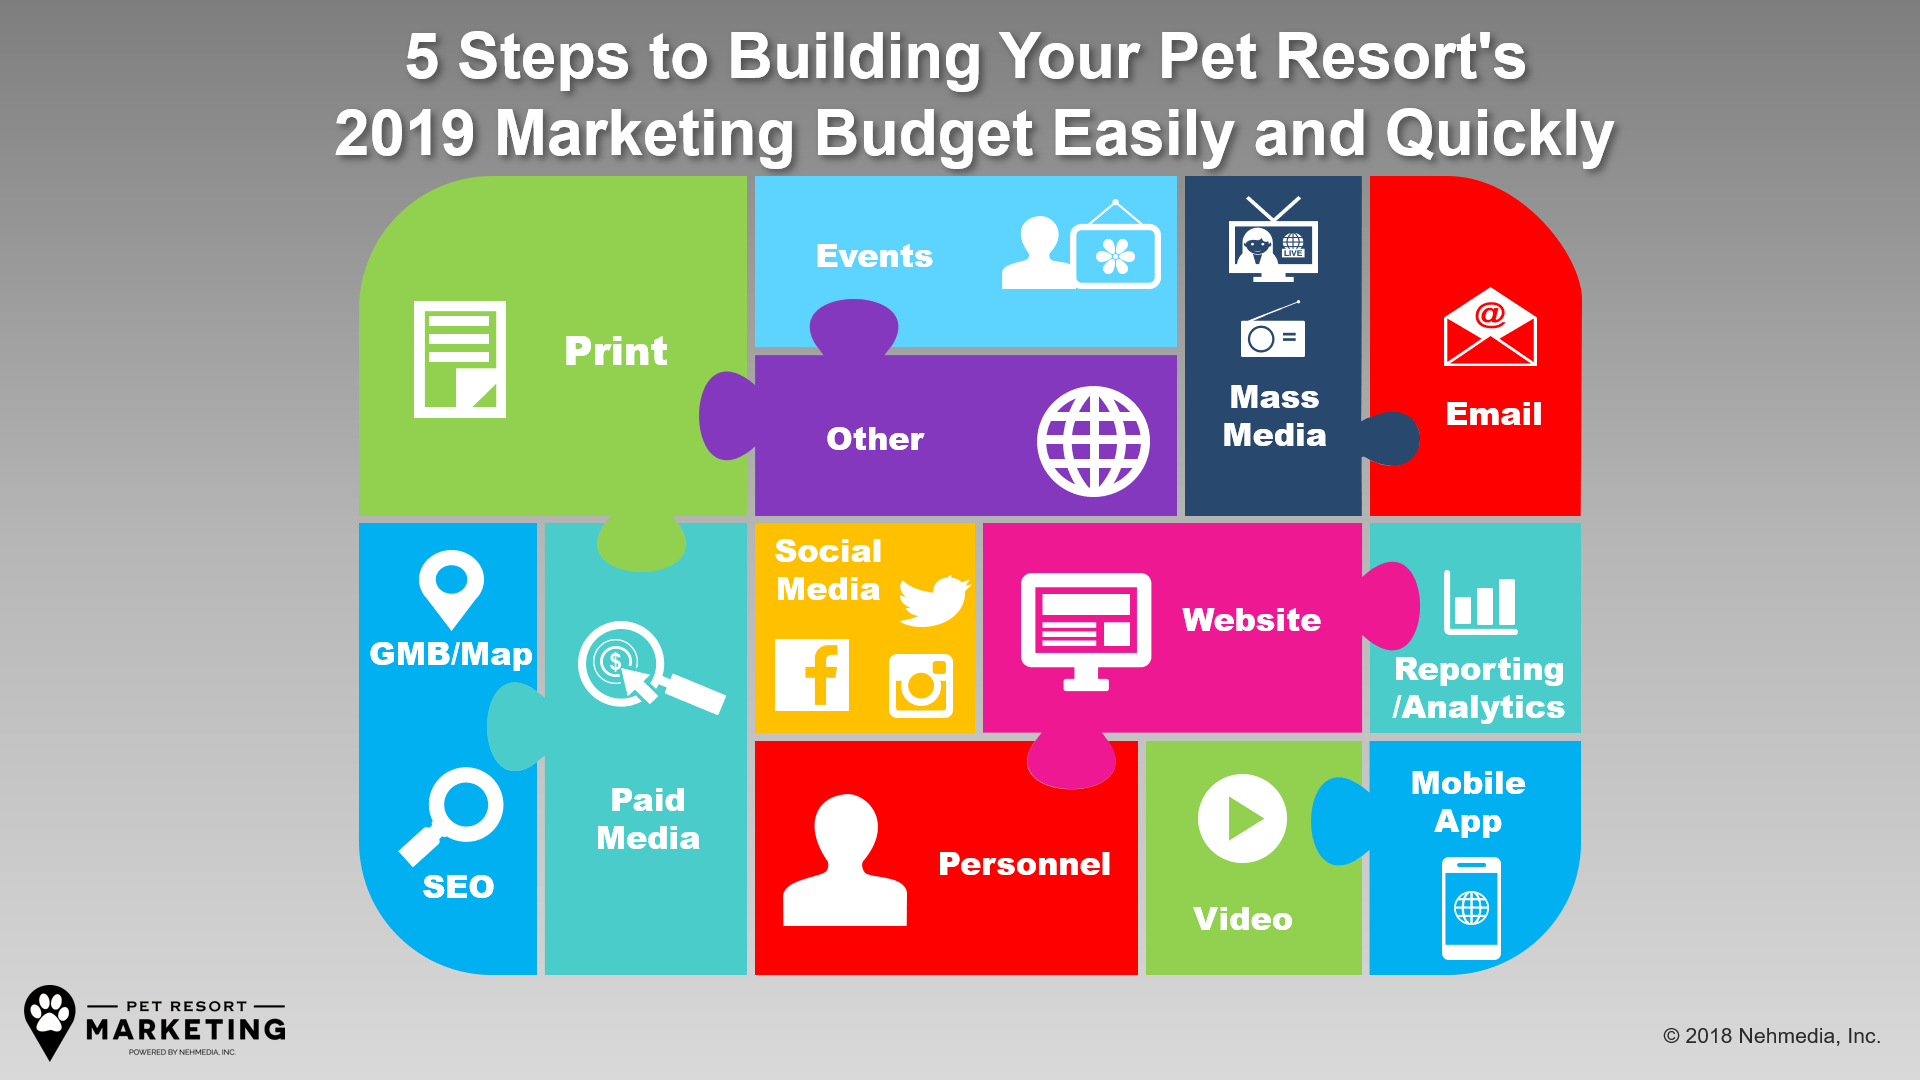 5 Steps to Building Your Pet Resort's 2019 Marketing Budget Easily and Quickly